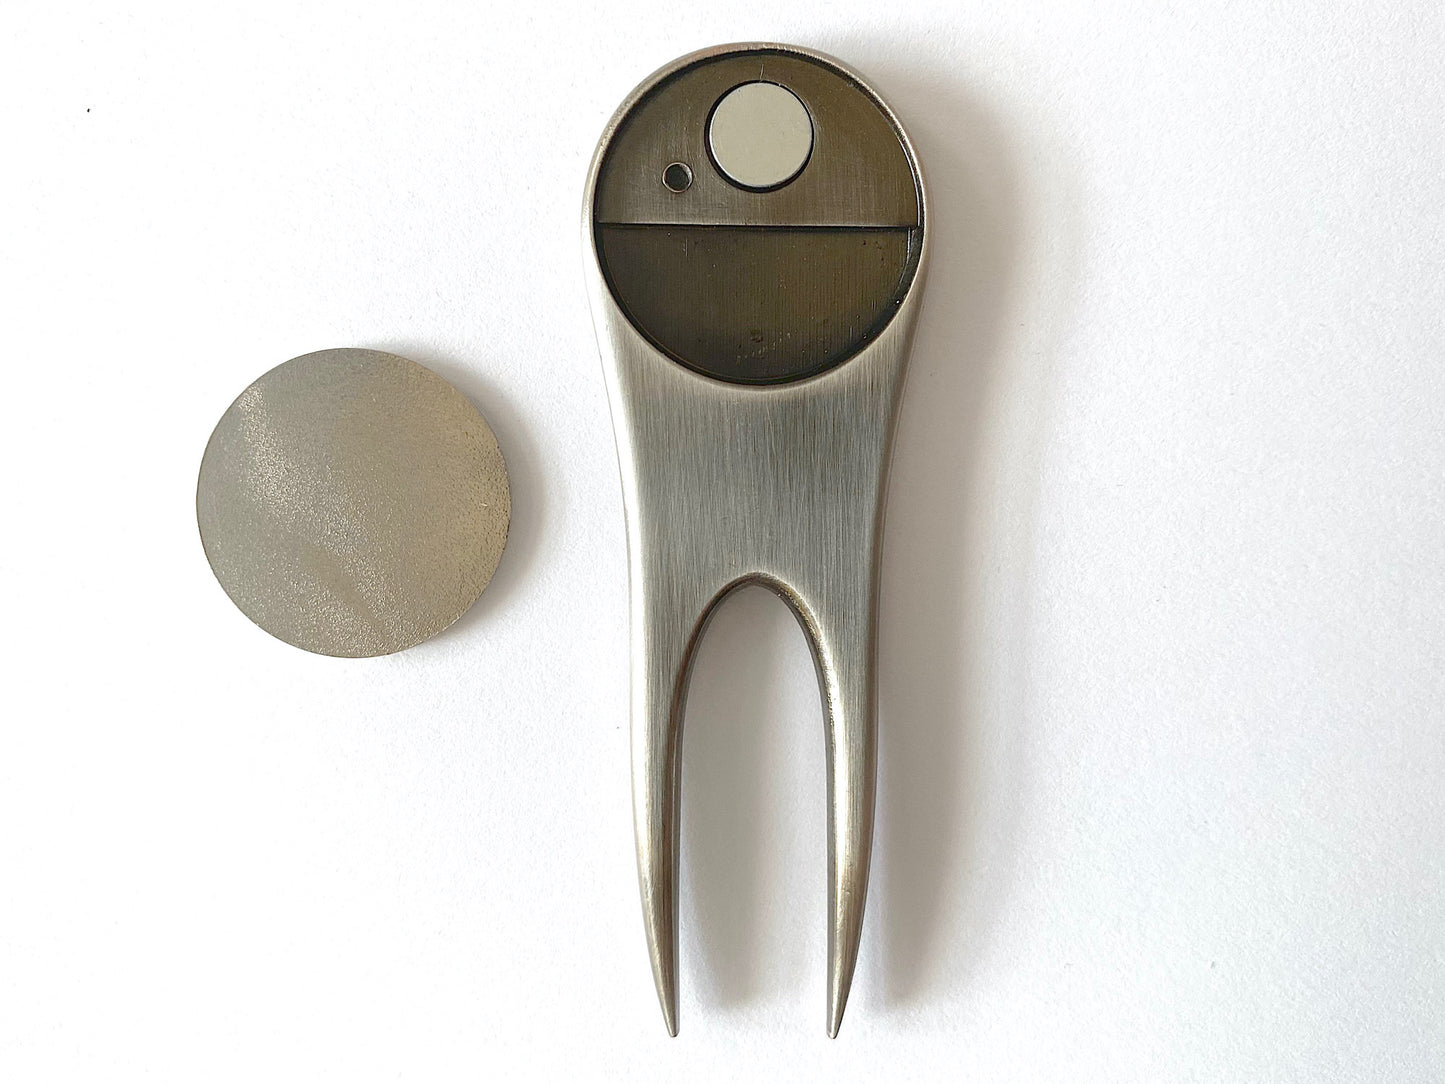 Army Golf Divot Tool and Ball Marker